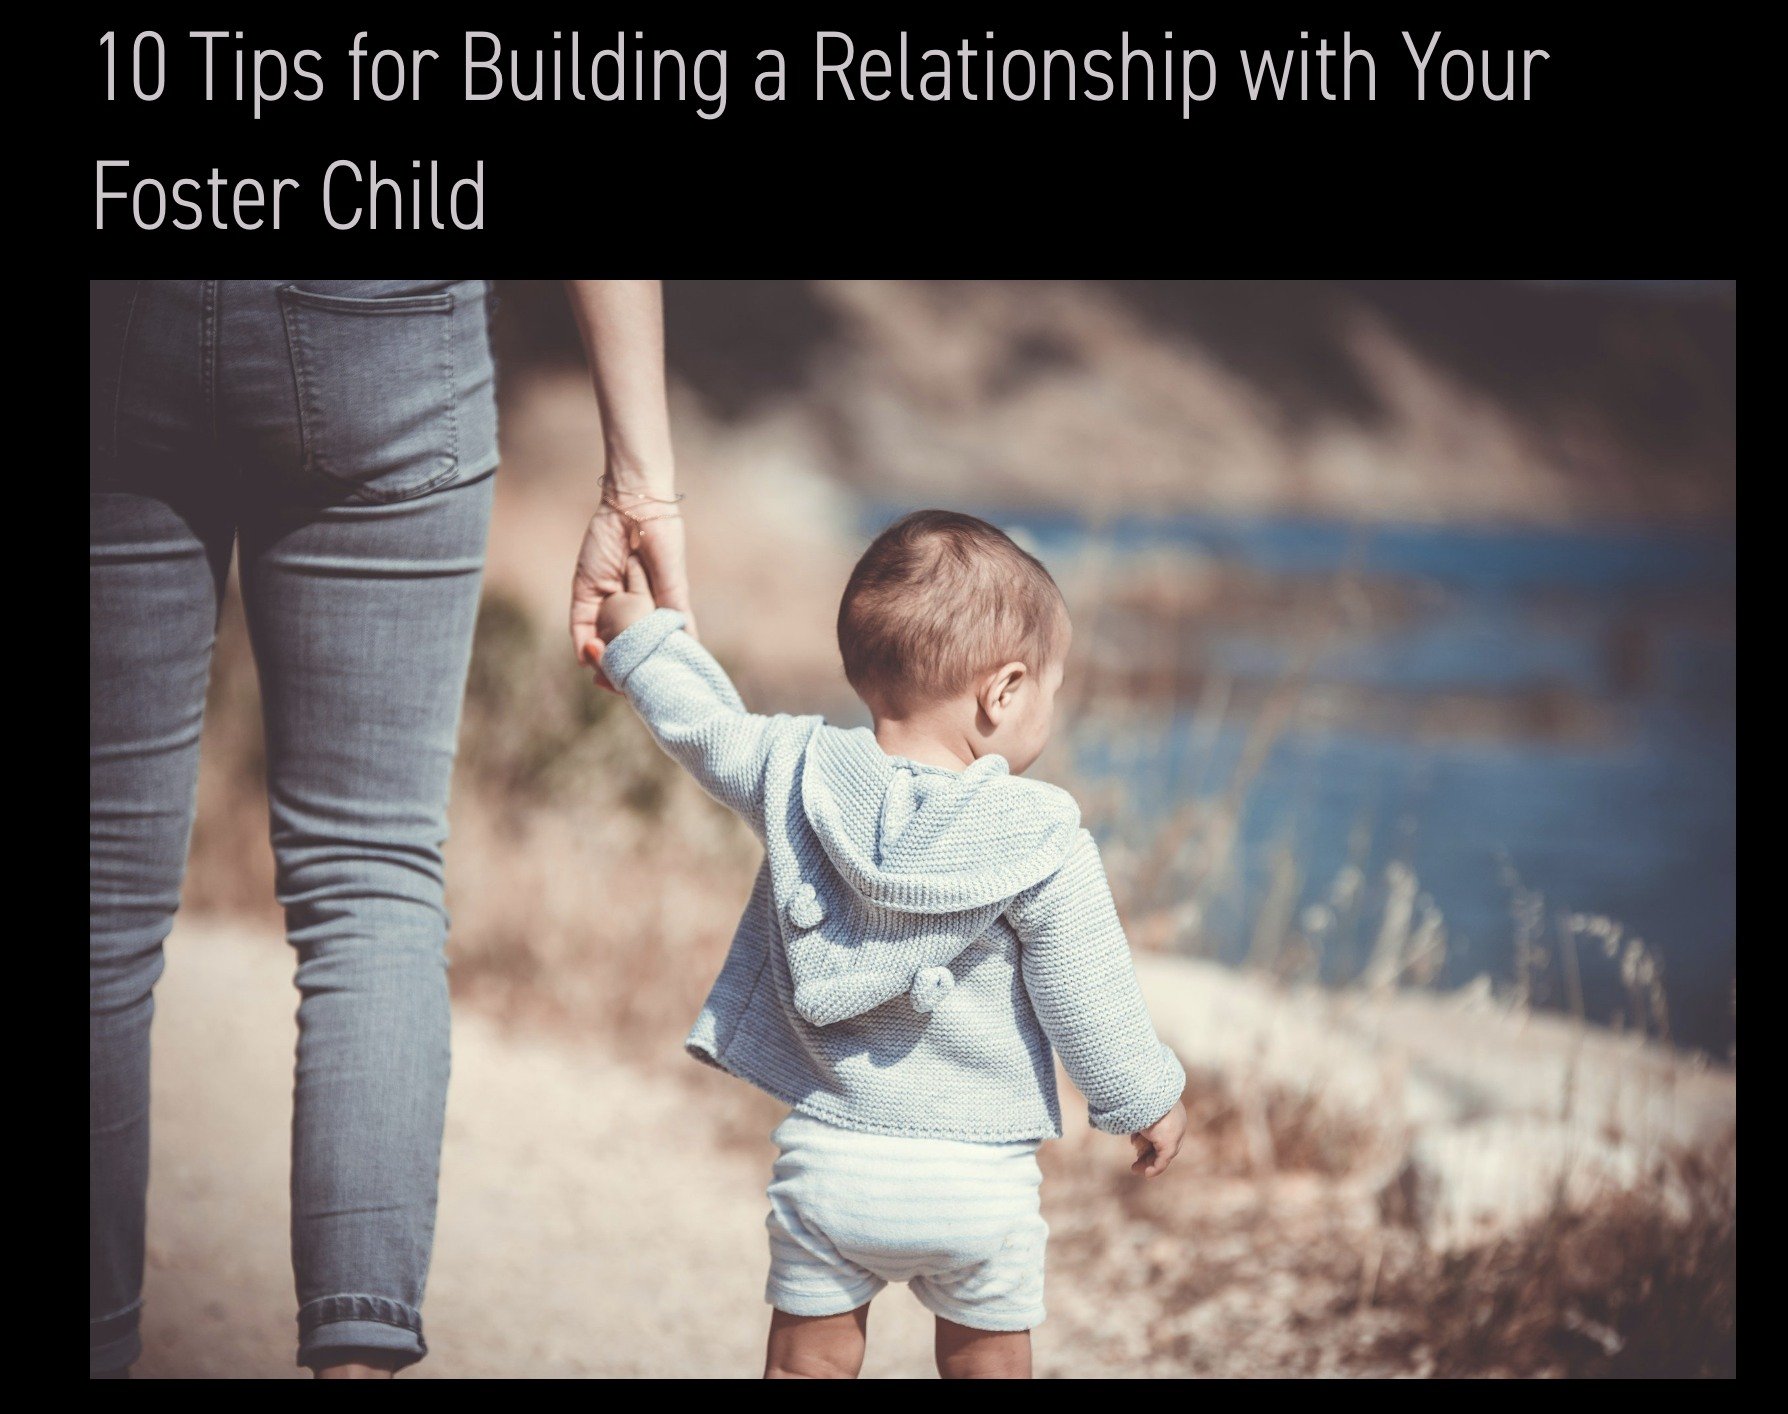 Fostering a child can be one of the most rewarding yet challenging experiences. 

Building a strong, trusting relationship with your foster child is crucial for their well-being and for creating a harmonious household. 

Read this week's blog
Ten tip